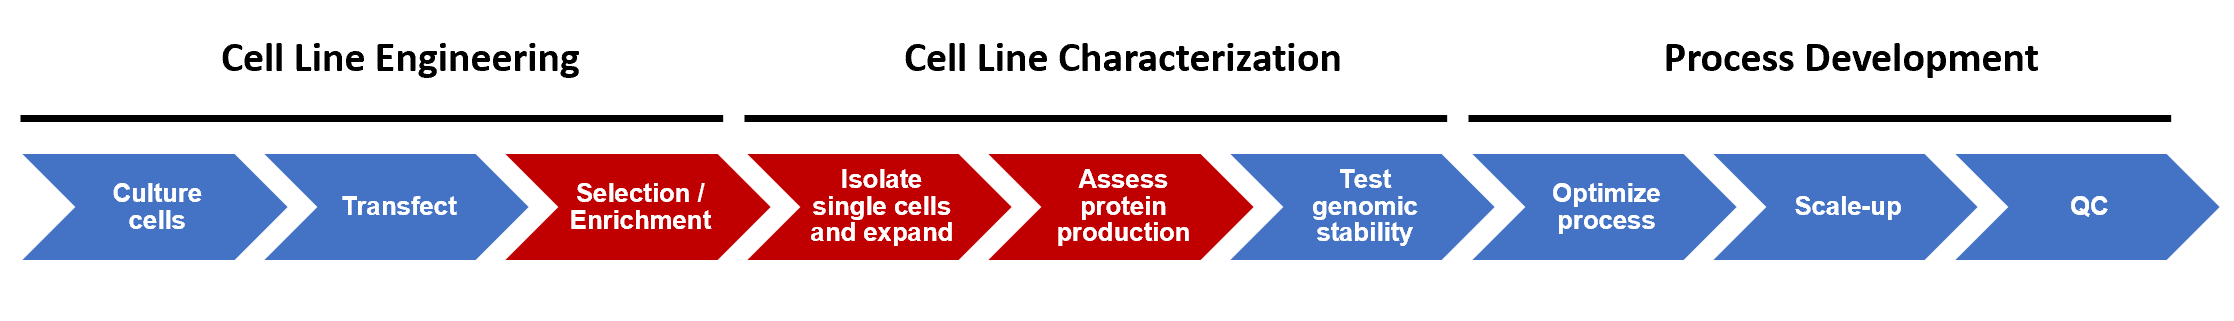 Figure 1. Cell line development process. Automated steps described here are indicated in red.